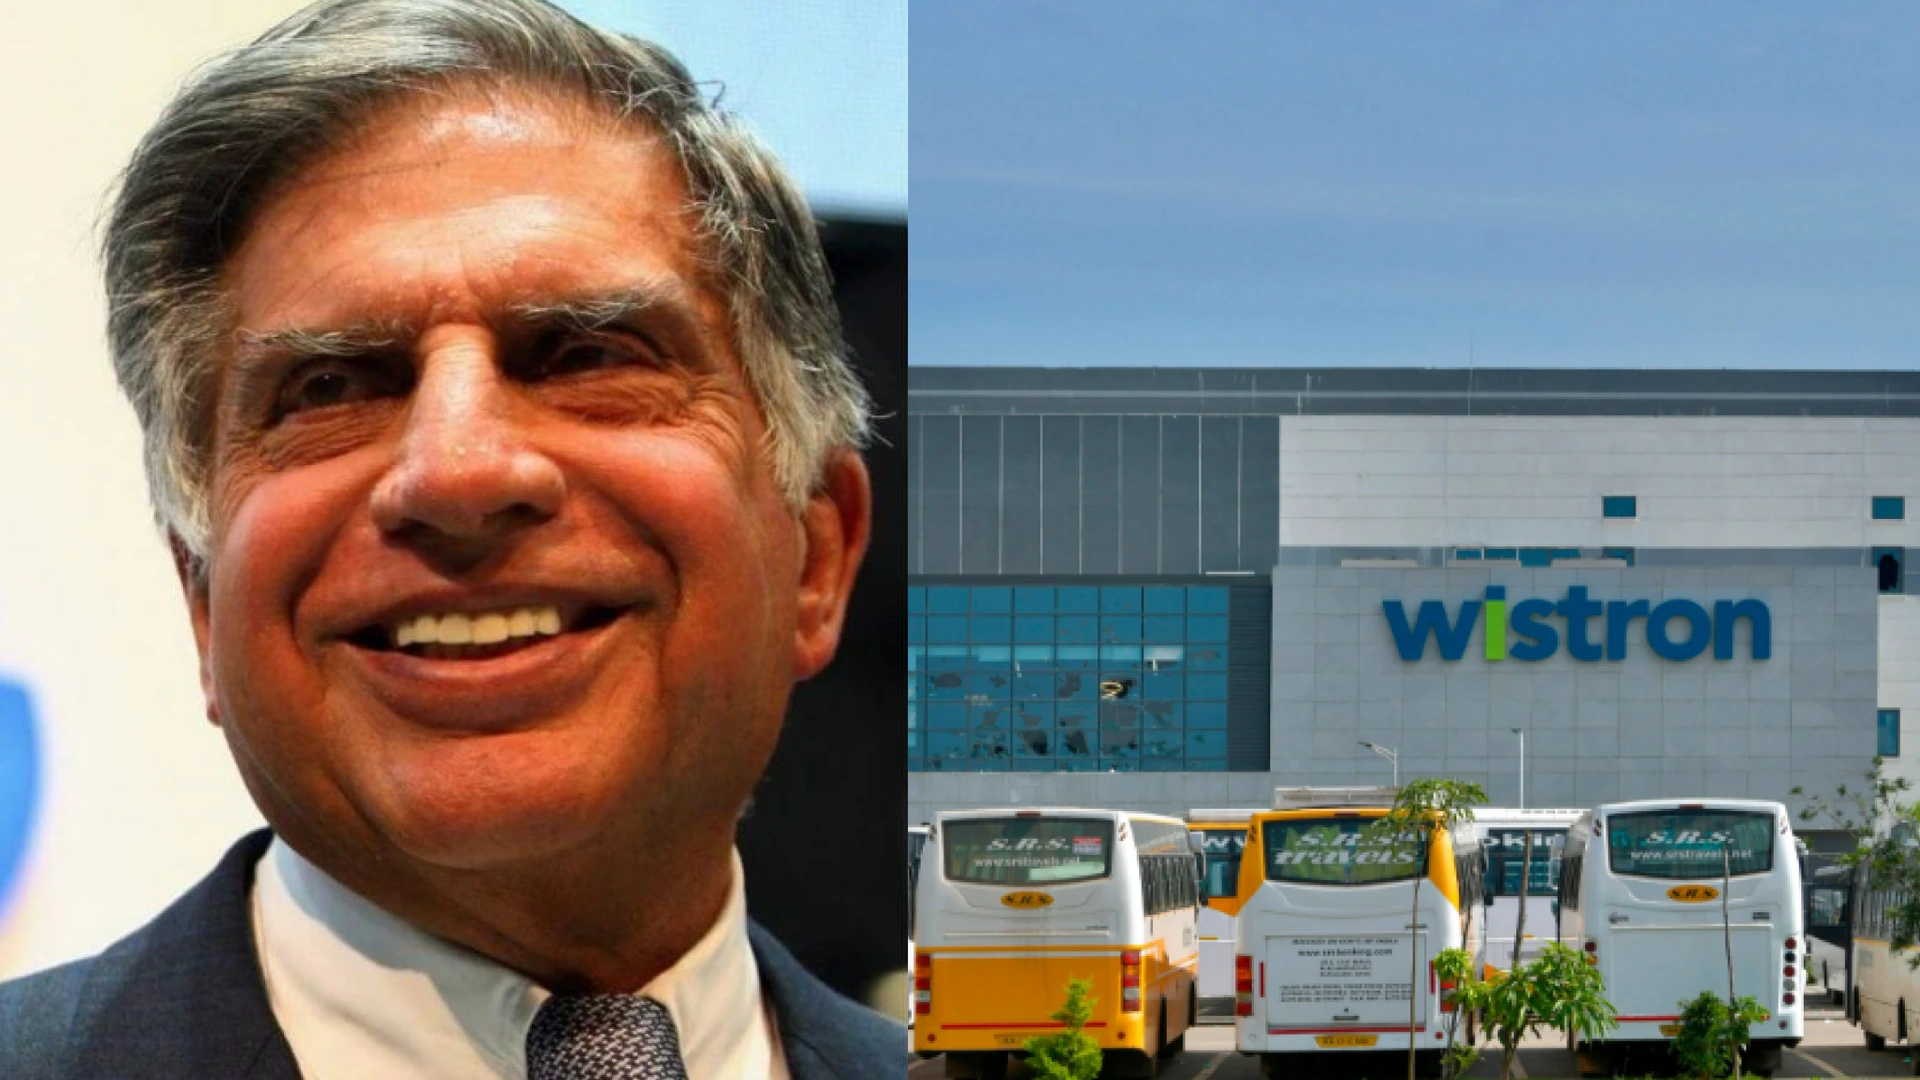 Tata Group wistron iPhone factory acquisition deal